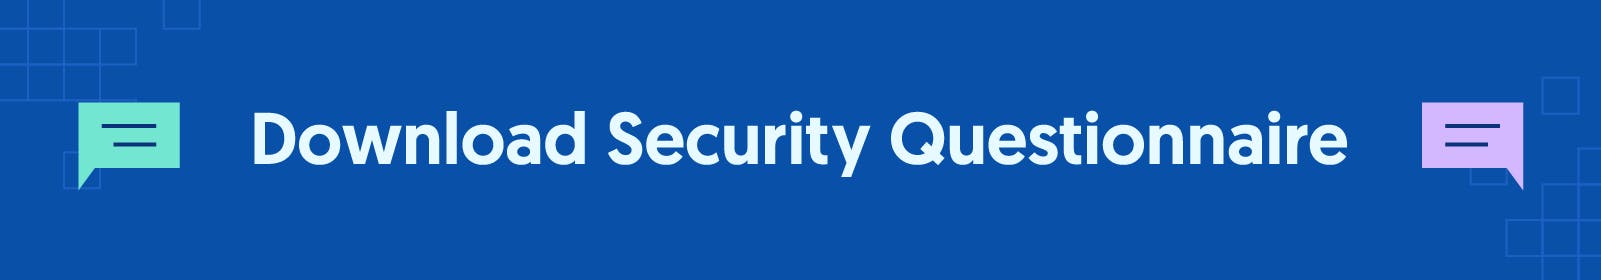 Dark blue rectangle with text reading: Download Security Questionnaire